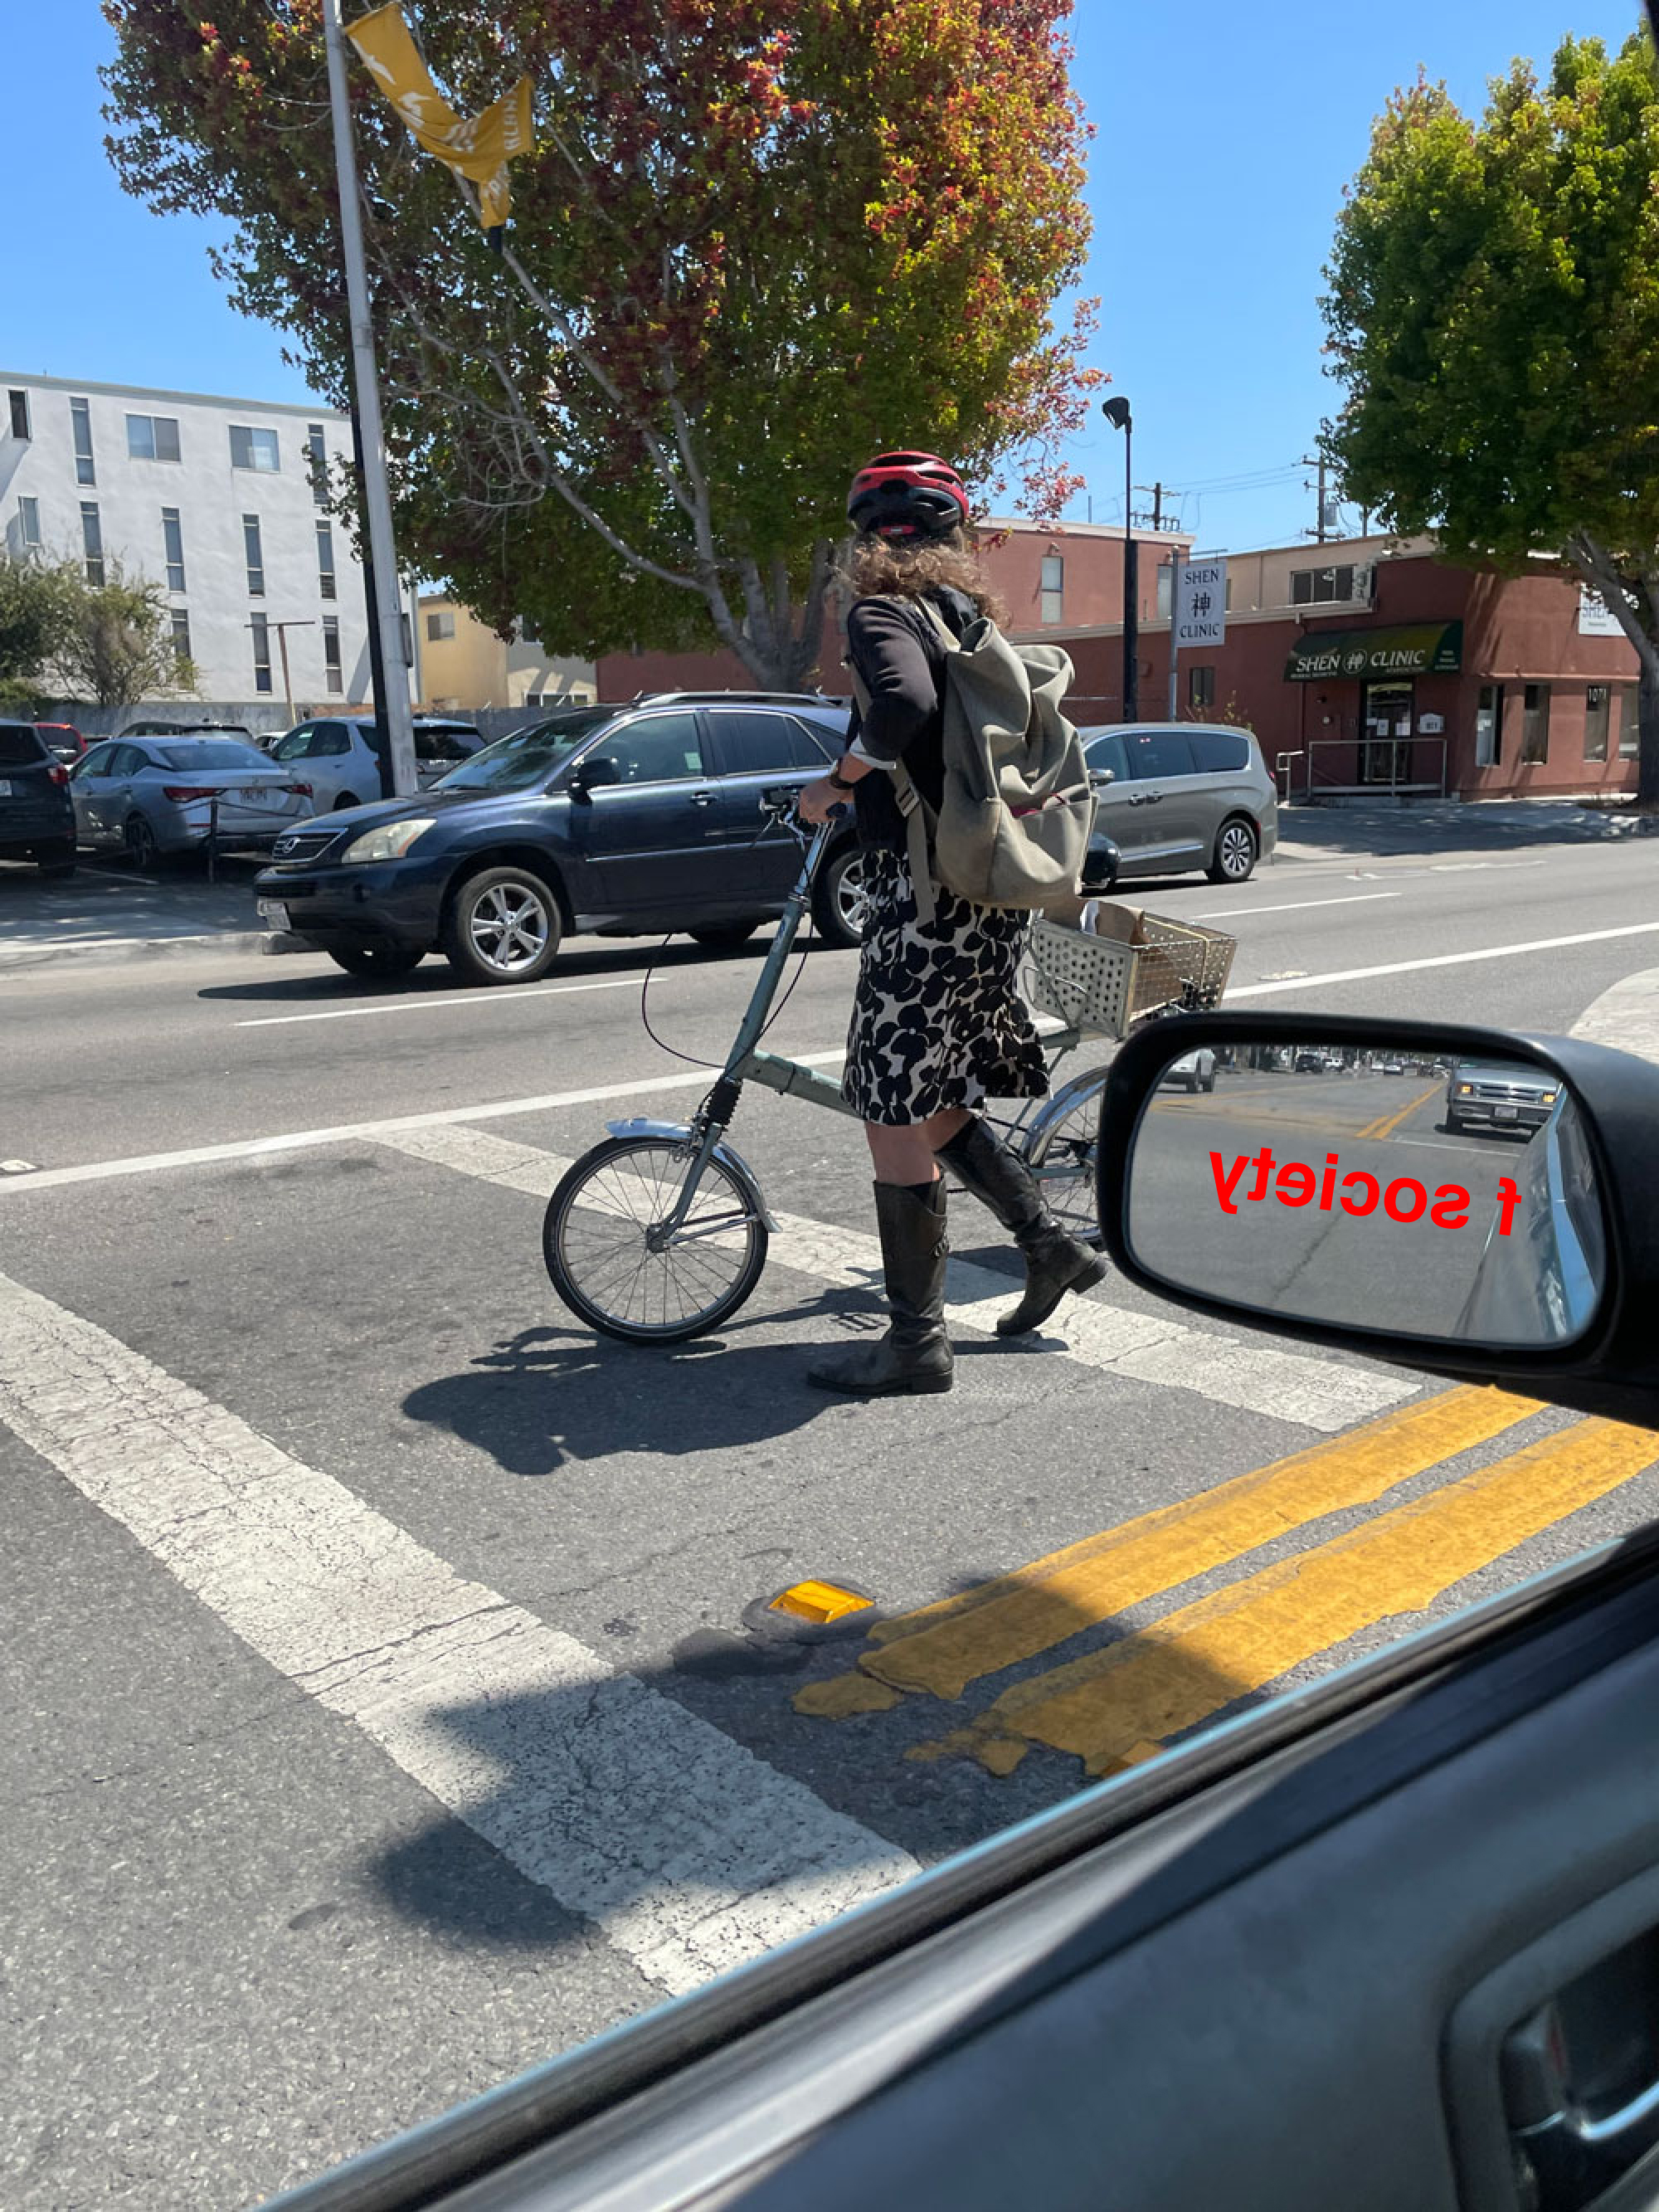 someone riding f cycle in berkeley?